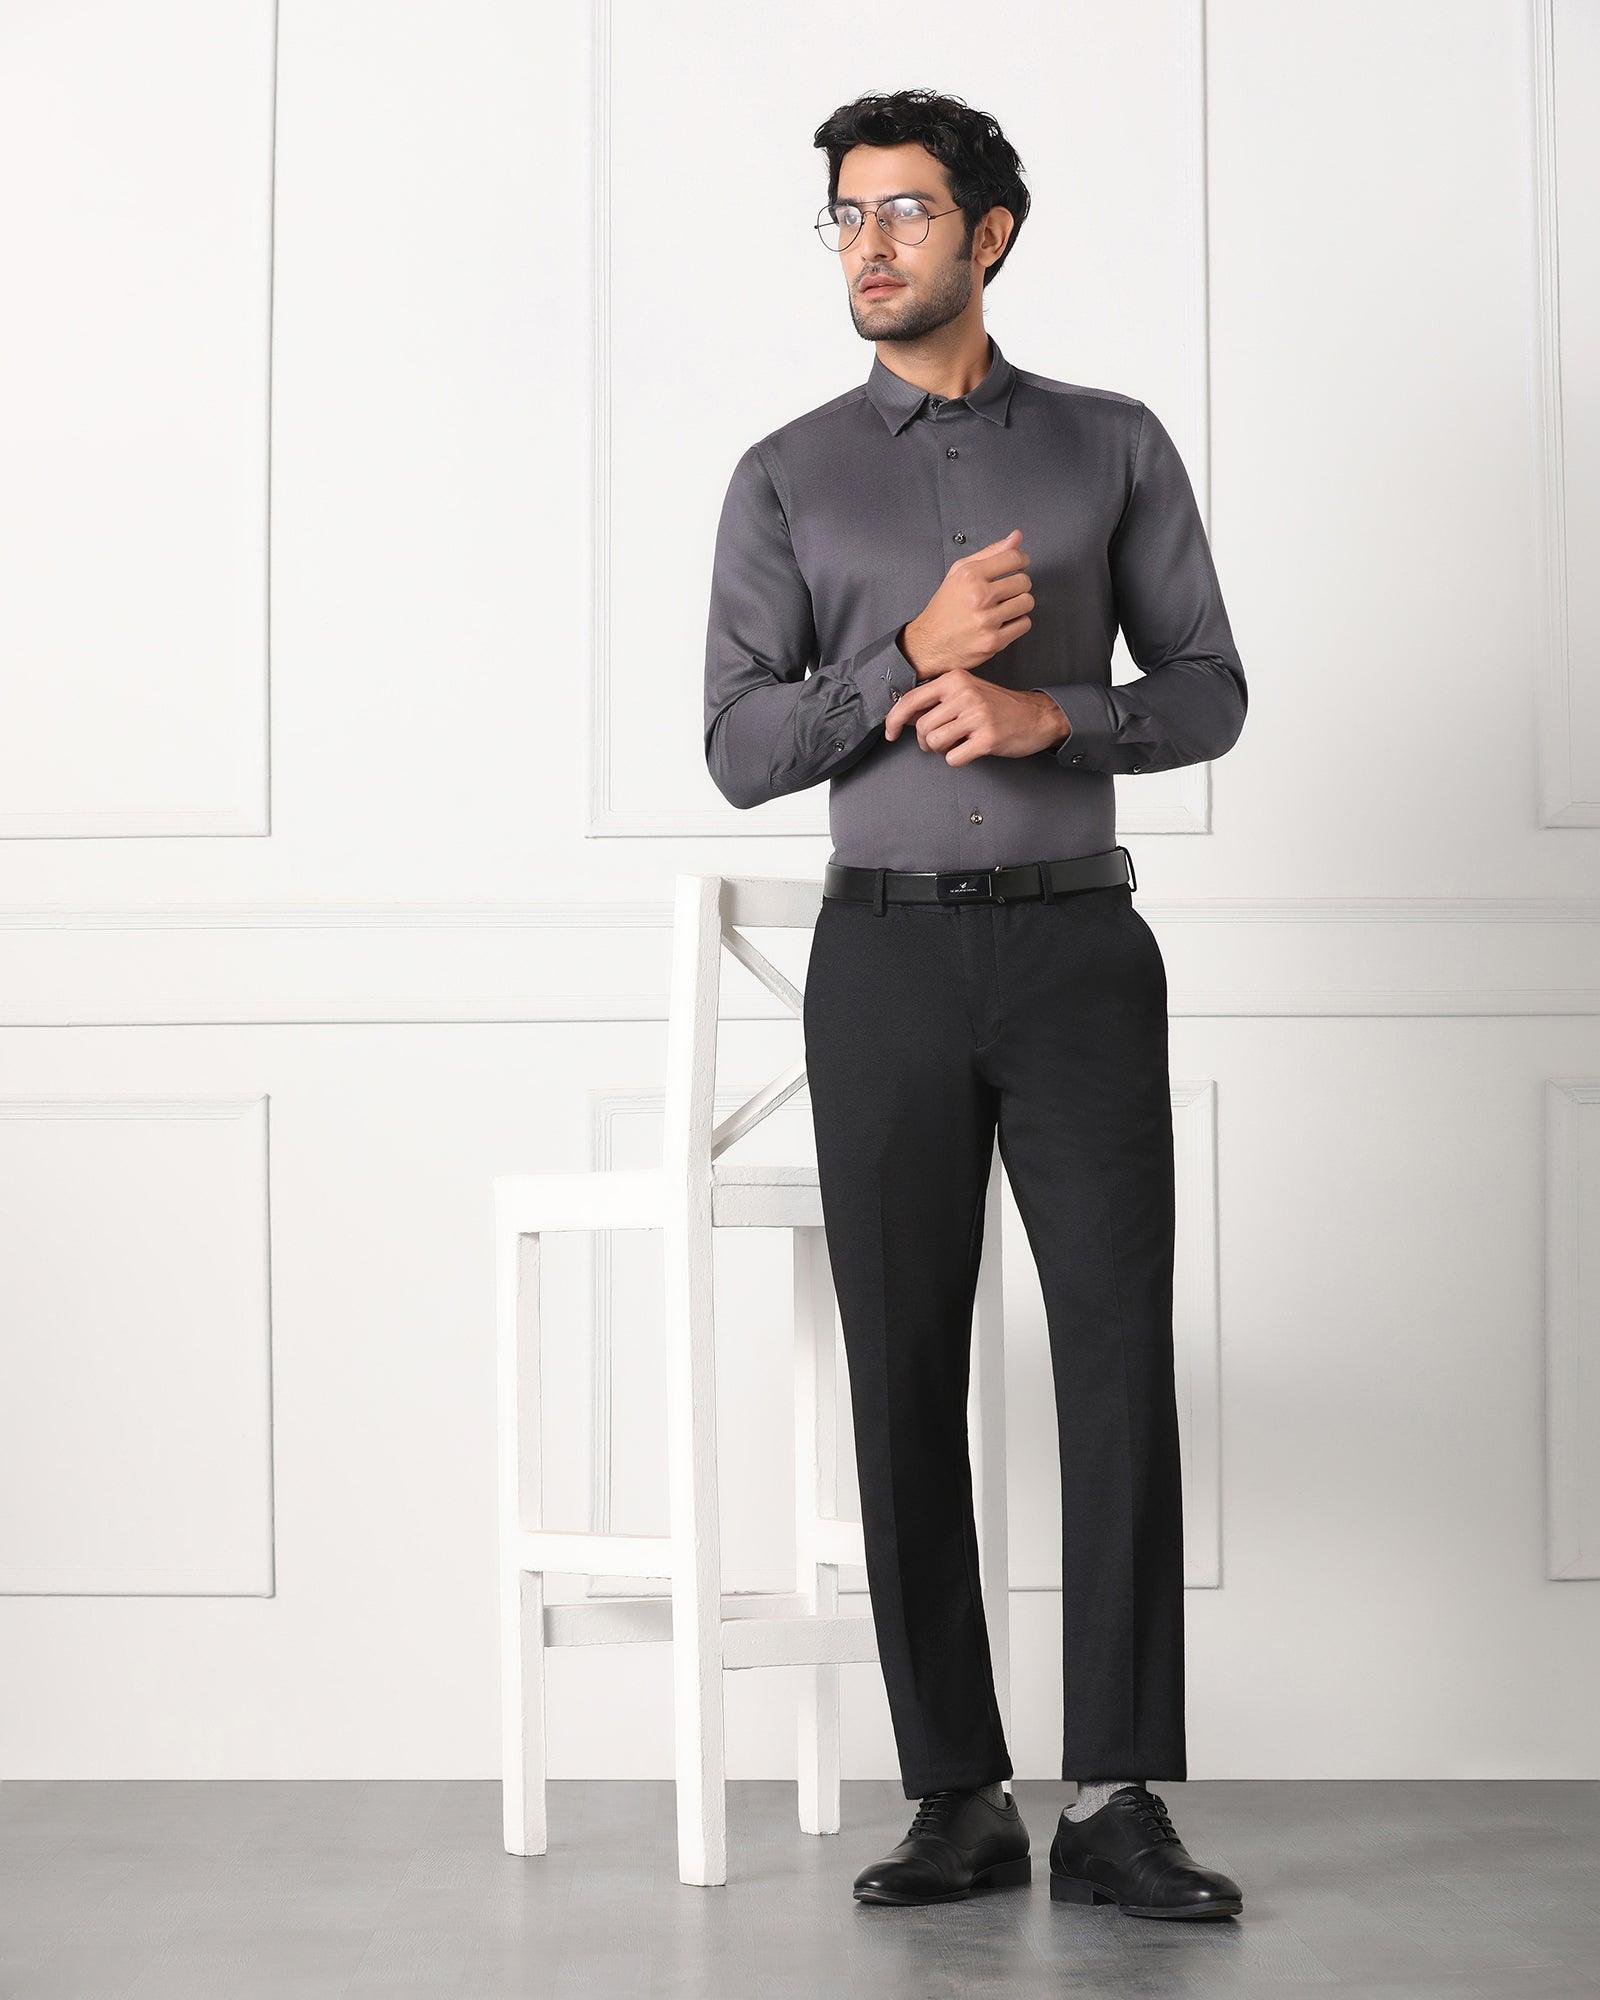 3 Ways to Wear Grey Pants to the Office  Putting Me Together